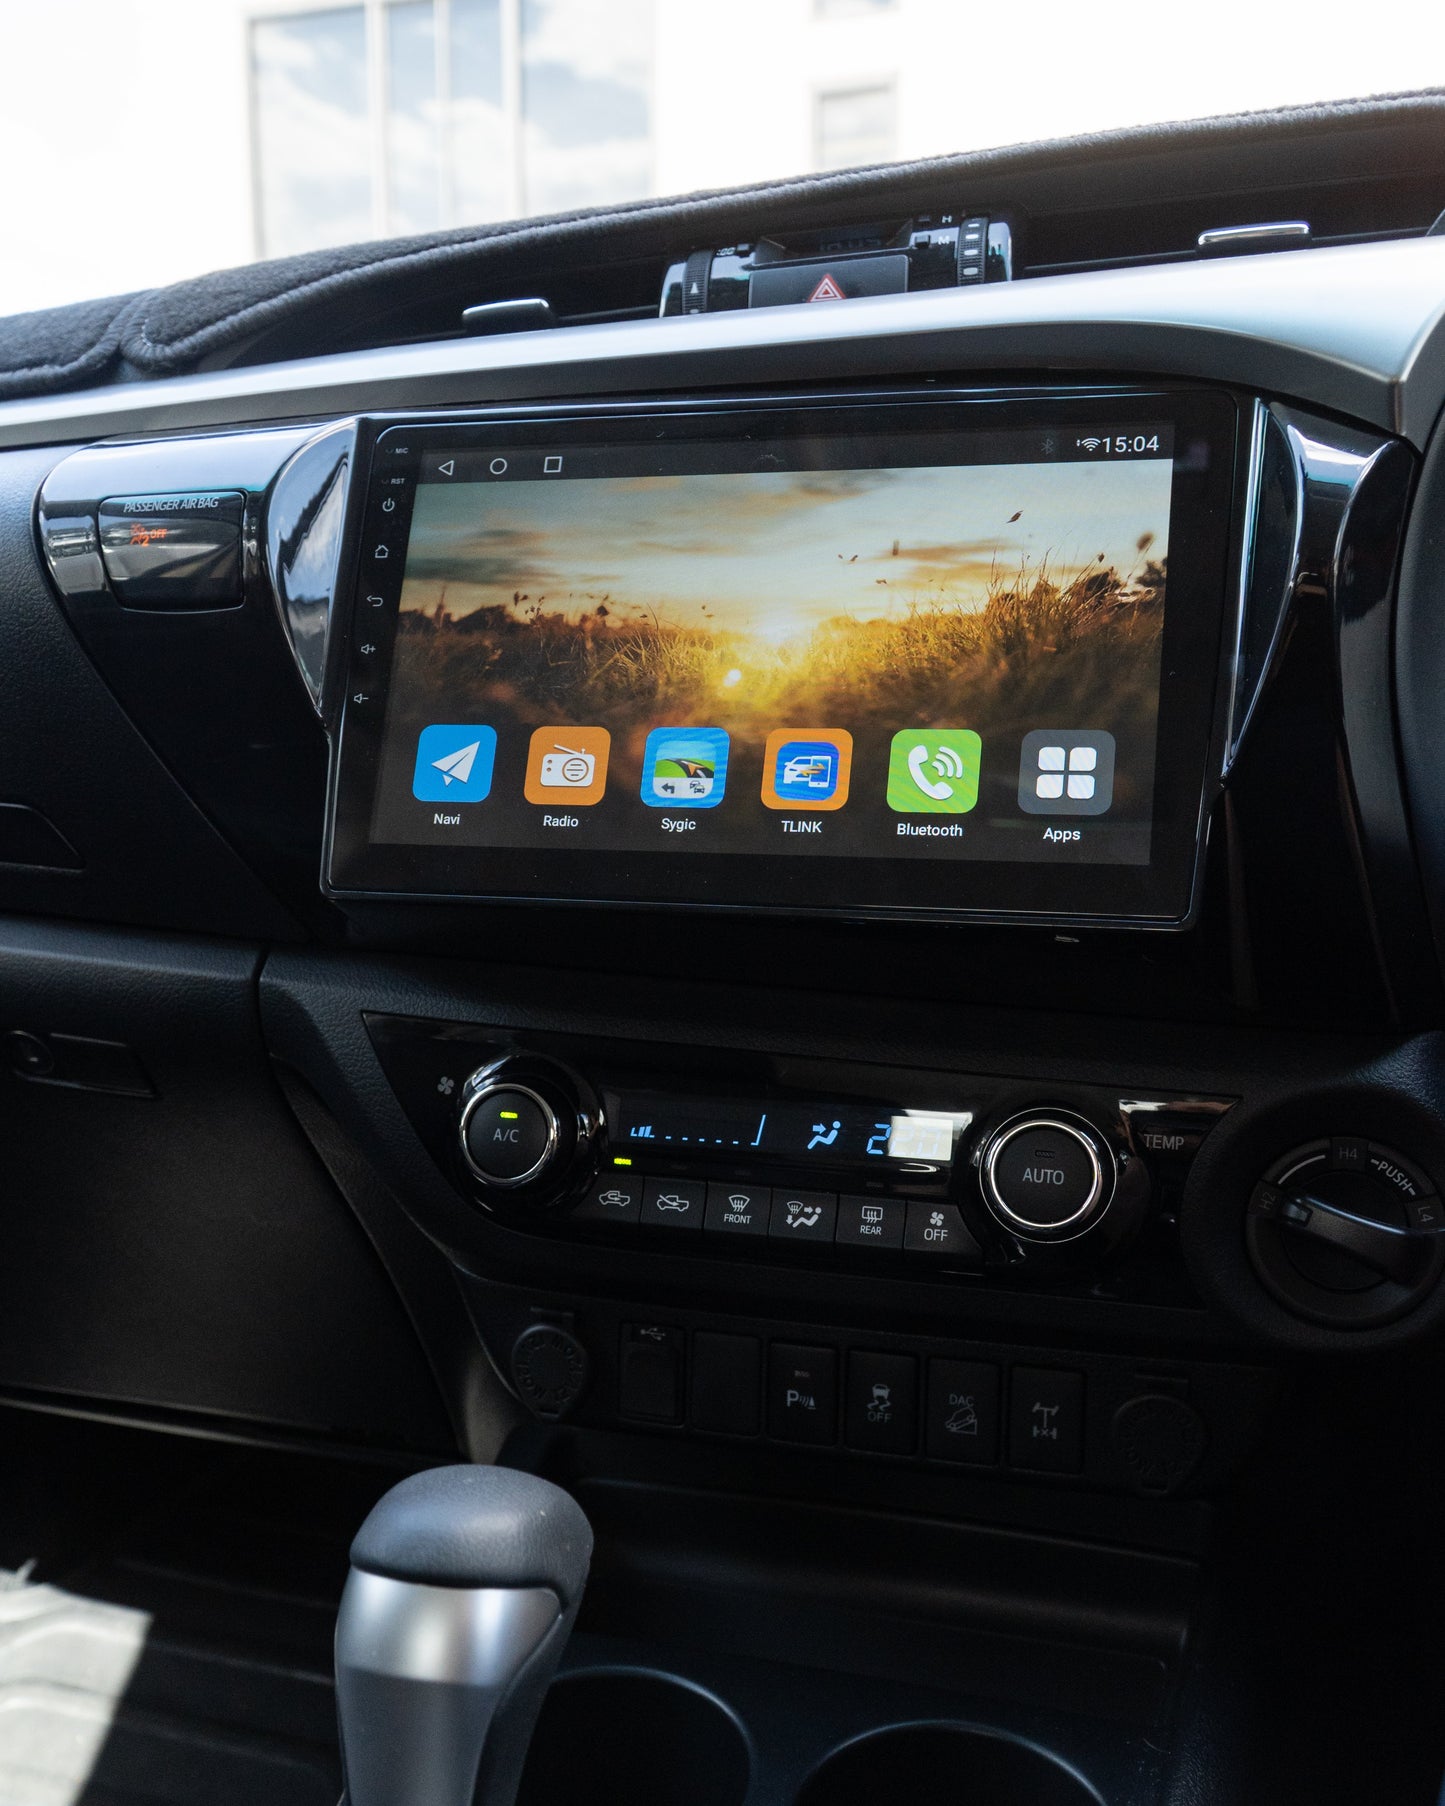 BUNDLE 10 inch Android head unit and Rear Screens to suit HILUX 2015+ N80